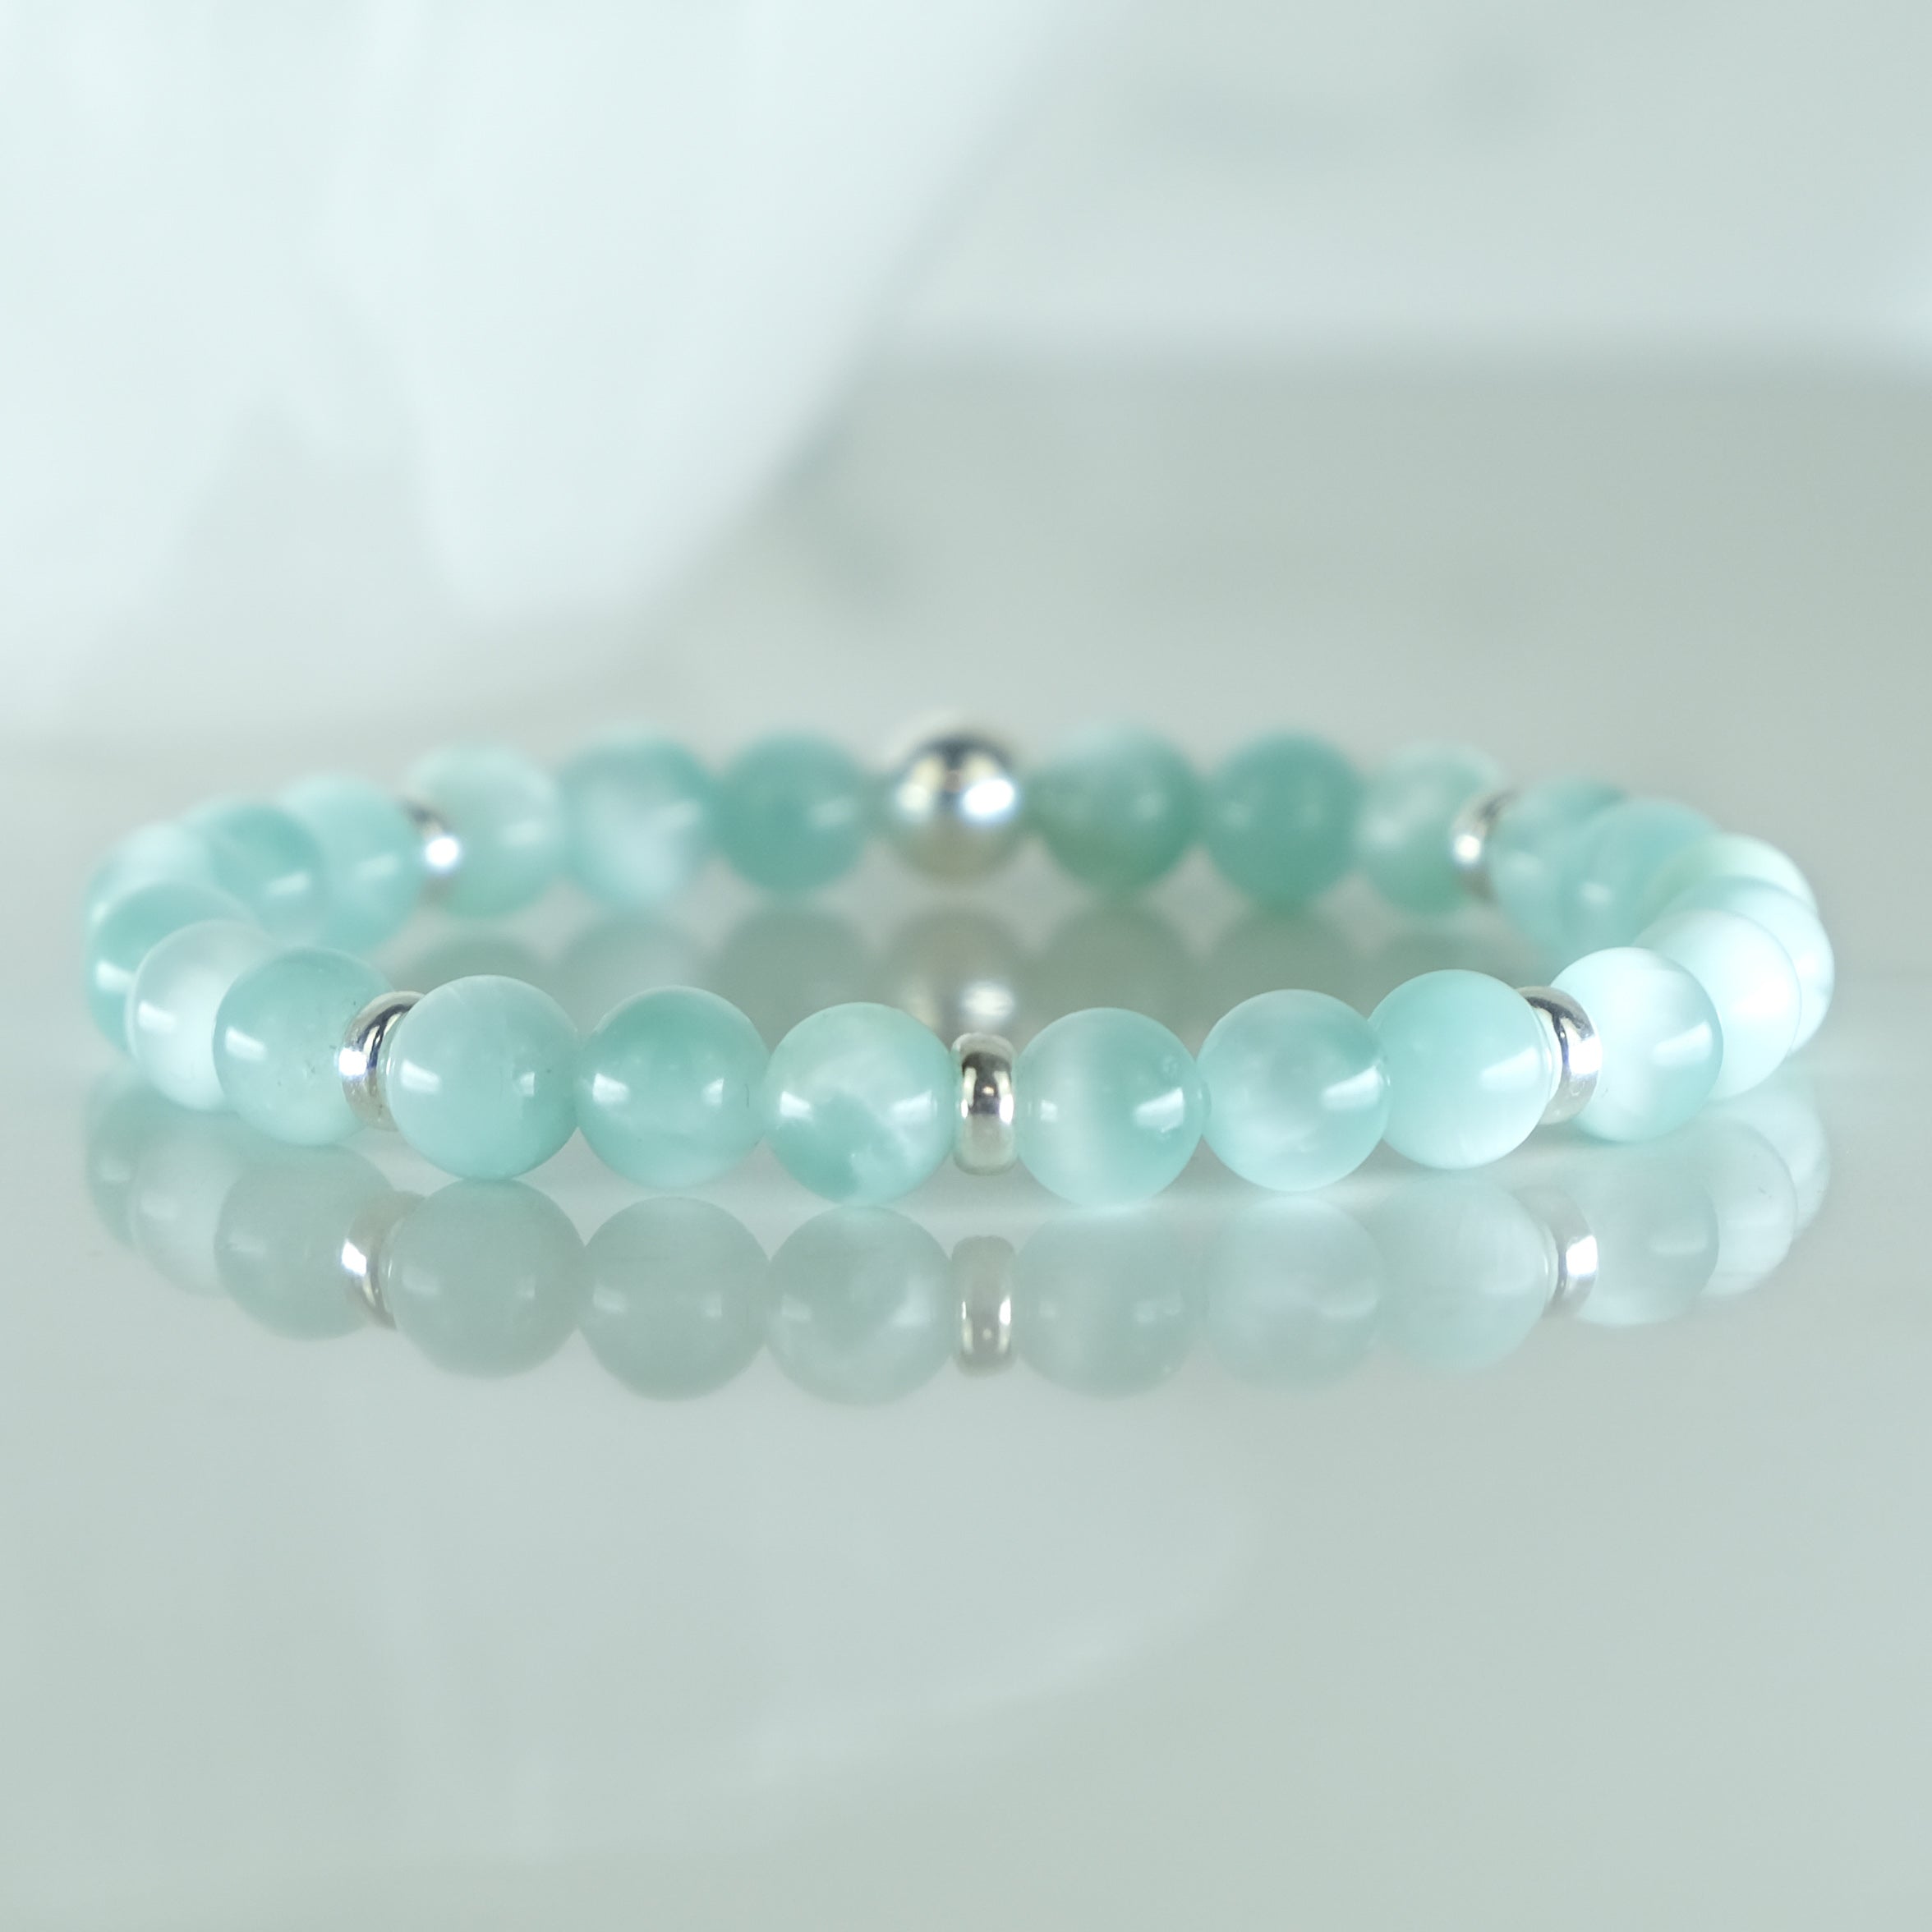 6mm green moonstone gemstone bracelet with 925 silver accents